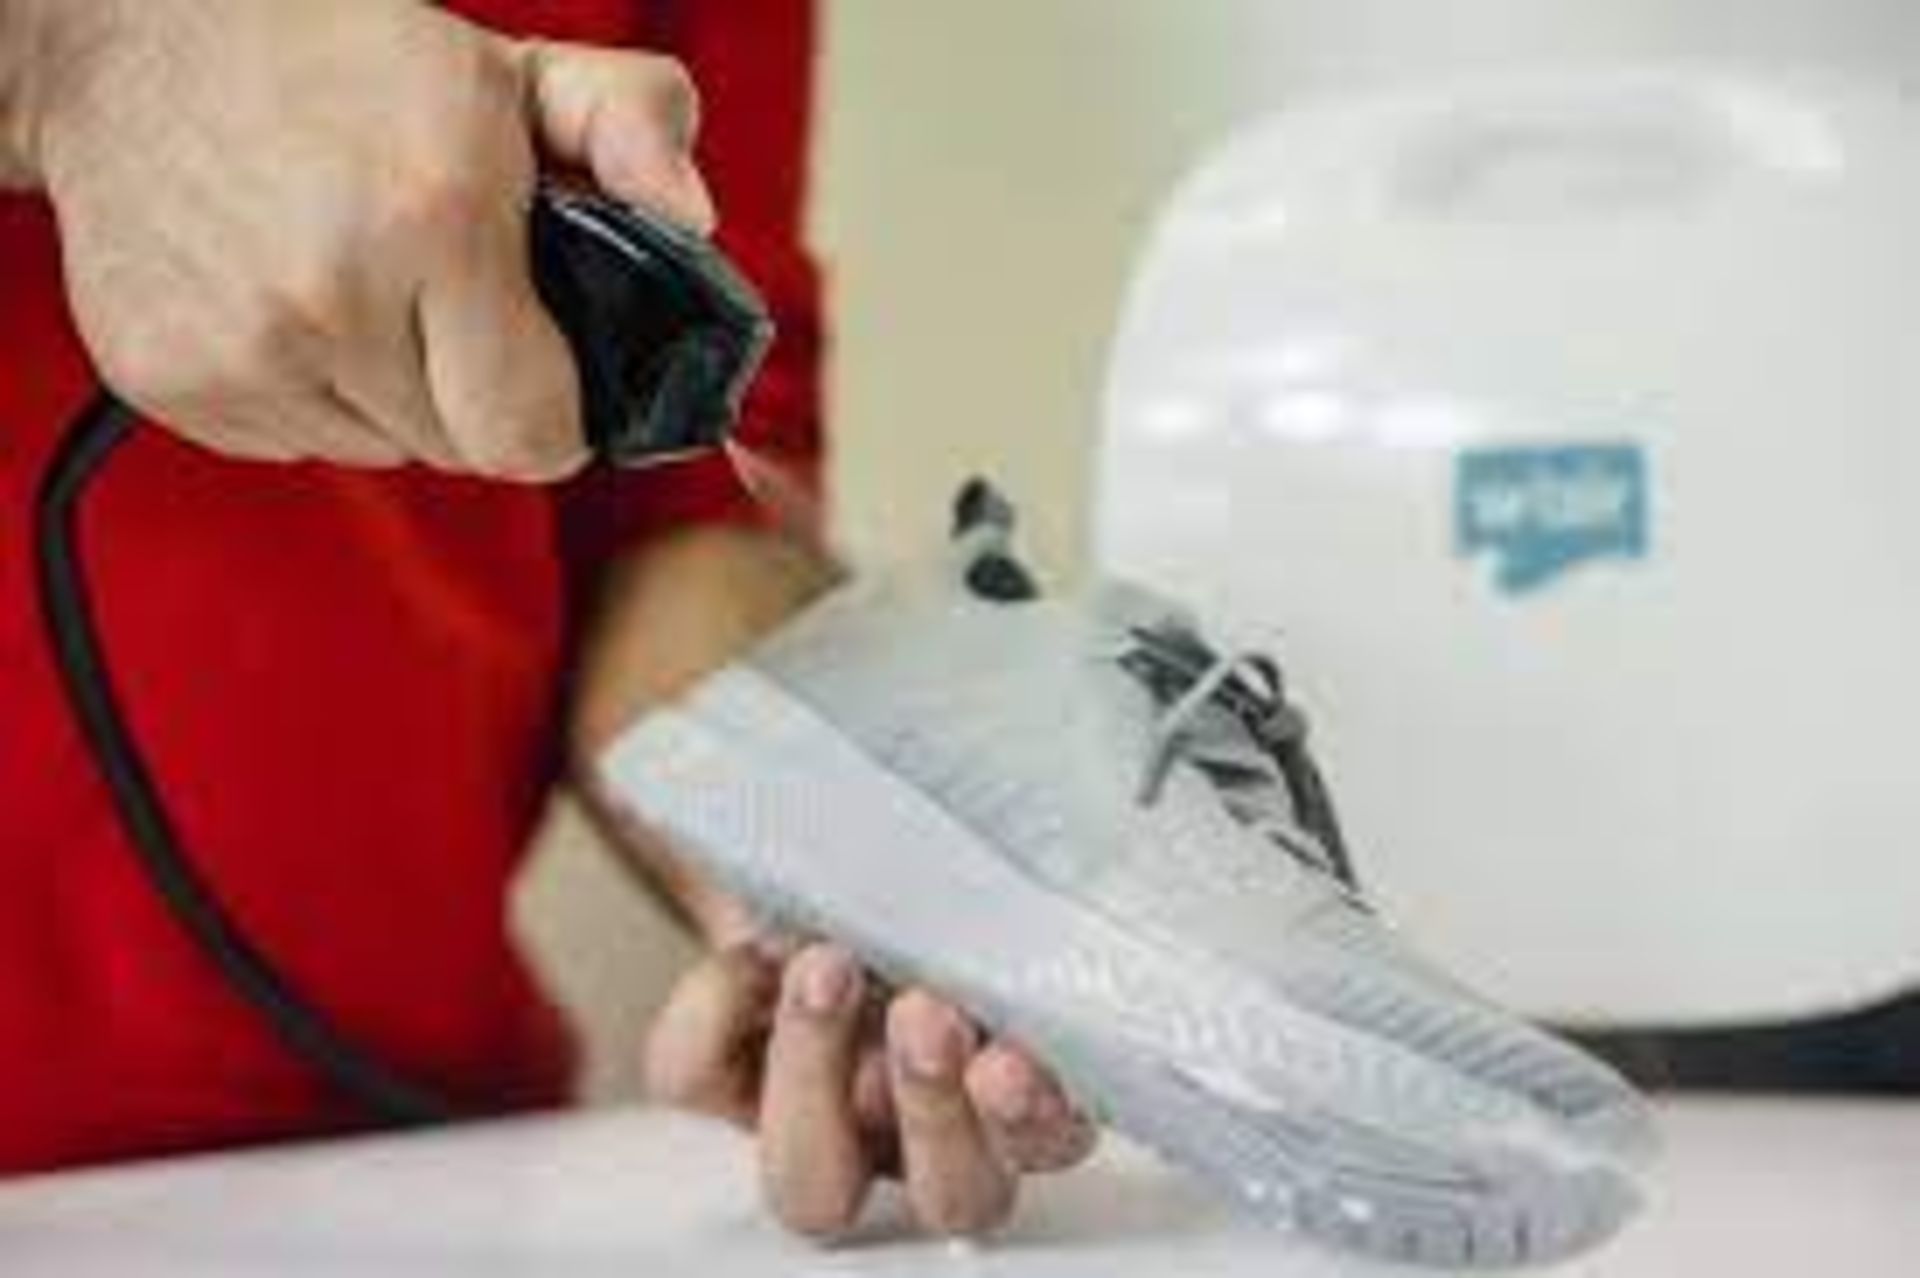 5 X BRAND NEW W'AIR SNEAKER CLEANING SYSTEMS RRP £299, The w'air uses hydrodynamic technology - Image 4 of 6